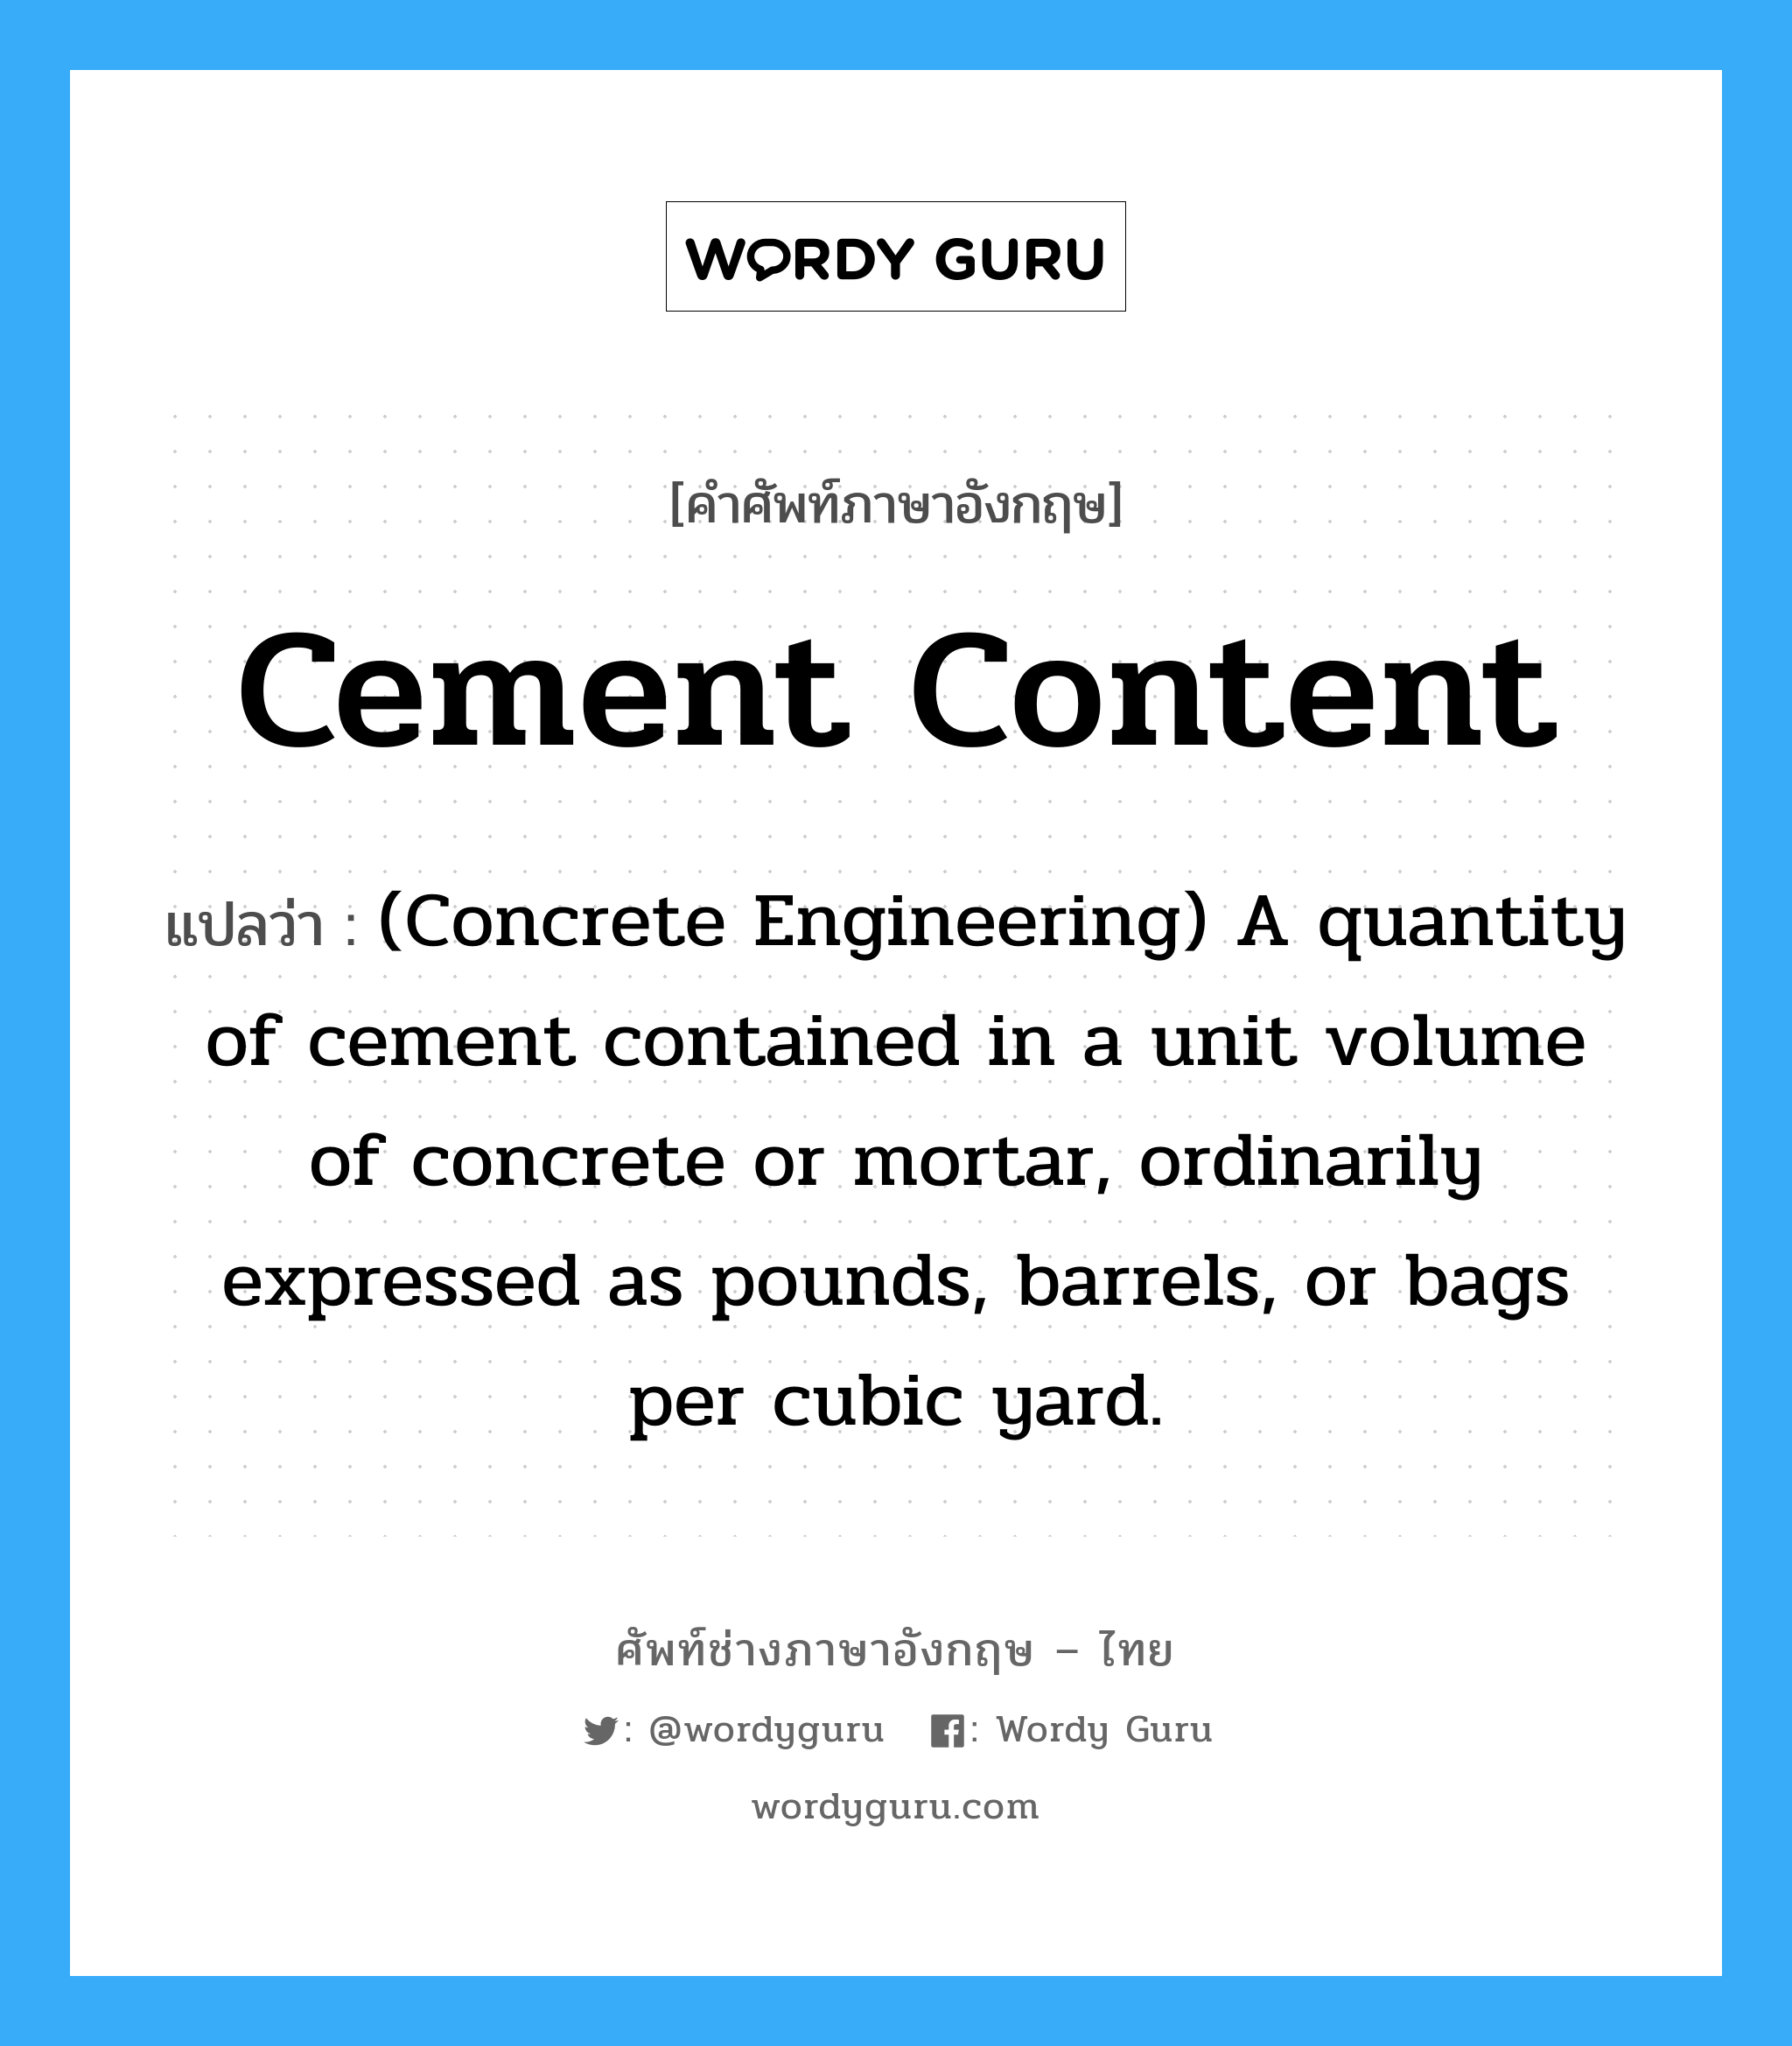 (Concrete Engineering) A quantity of cement contained in a unit volume of concrete or mortar, ordinarily expressed as pounds, barrels, or bags per cubic yard. ภาษาอังกฤษ?, คำศัพท์ช่างภาษาอังกฤษ - ไทย (Concrete Engineering) A quantity of cement contained in a unit volume of concrete or mortar, ordinarily expressed as pounds, barrels, or bags per cubic yard. คำศัพท์ภาษาอังกฤษ (Concrete Engineering) A quantity of cement contained in a unit volume of concrete or mortar, ordinarily expressed as pounds, barrels, or bags per cubic yard. แปลว่า Cement Content